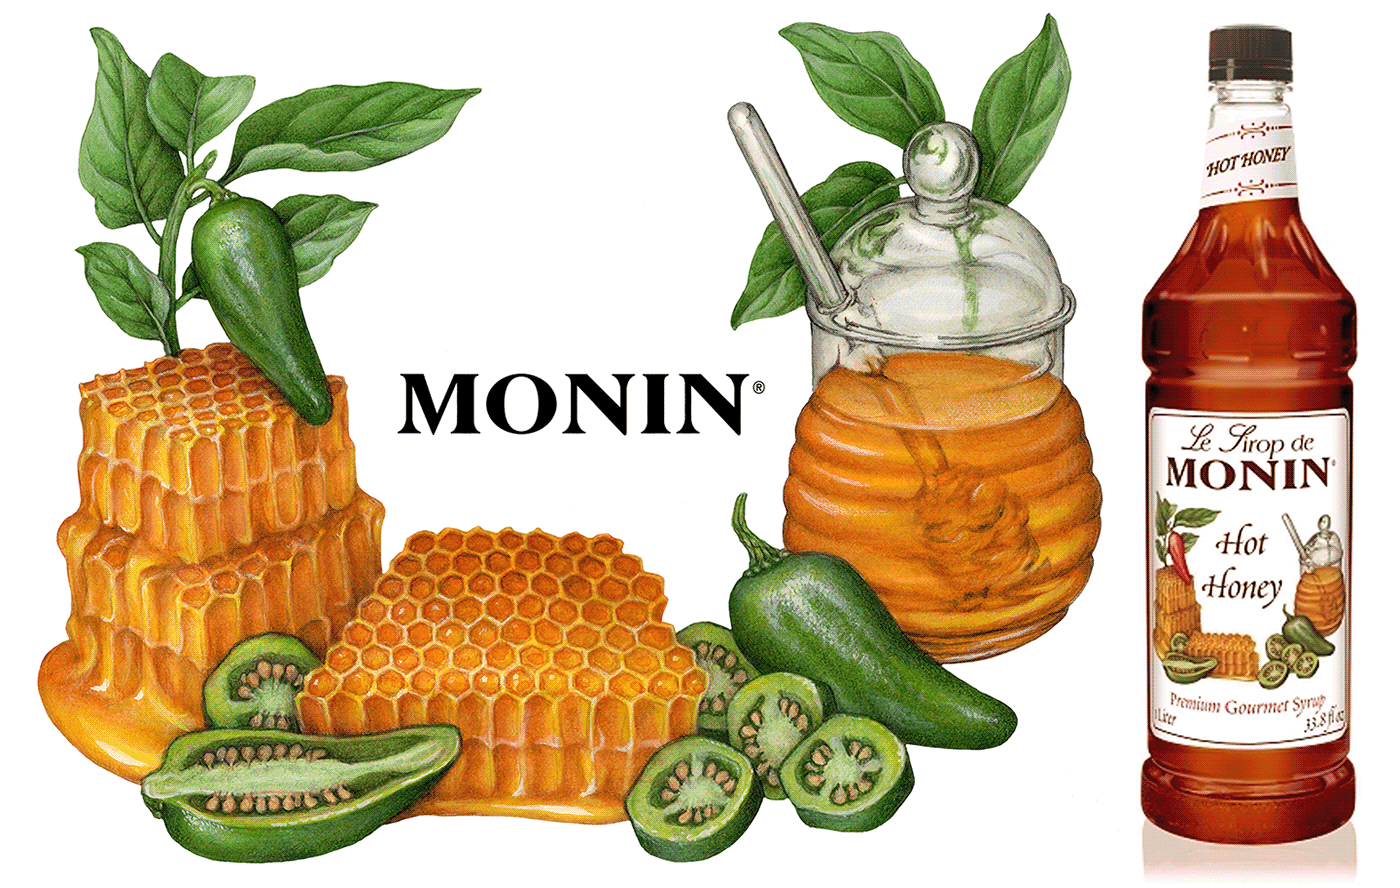 Realistic illustration of honey and jalapeno peppers used on packaging for Monin Hot Honey Syrup.